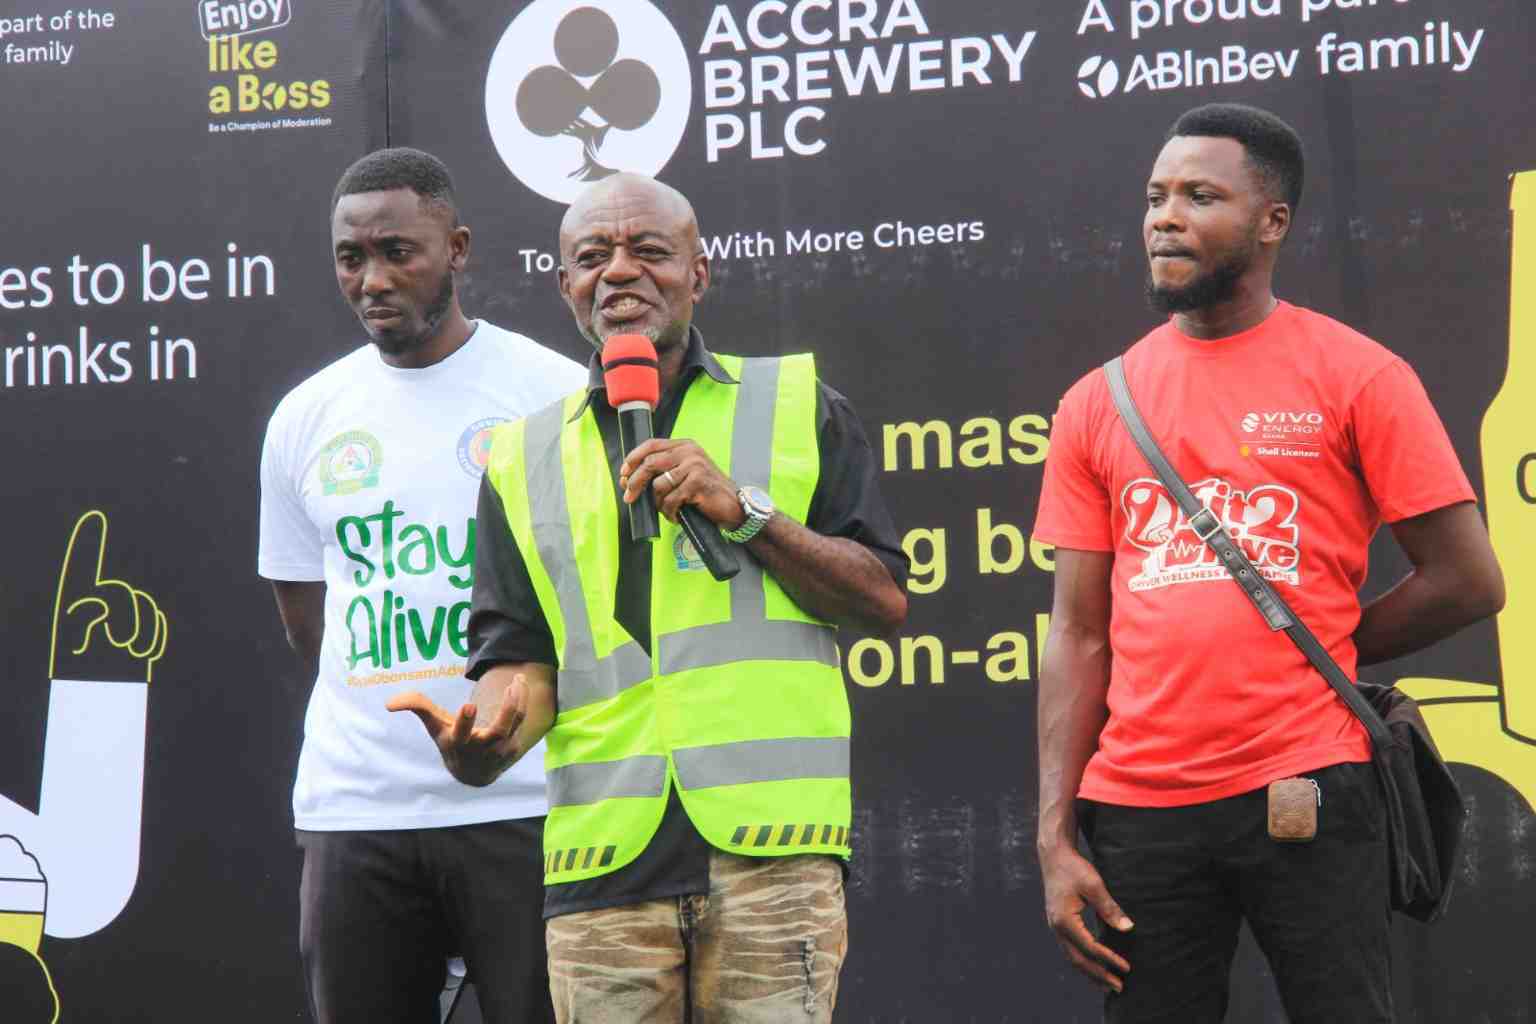 Abl Advocates For Responsible Drinking; Calls On Ghanaians To Enjoy Life Like A Boss This November.